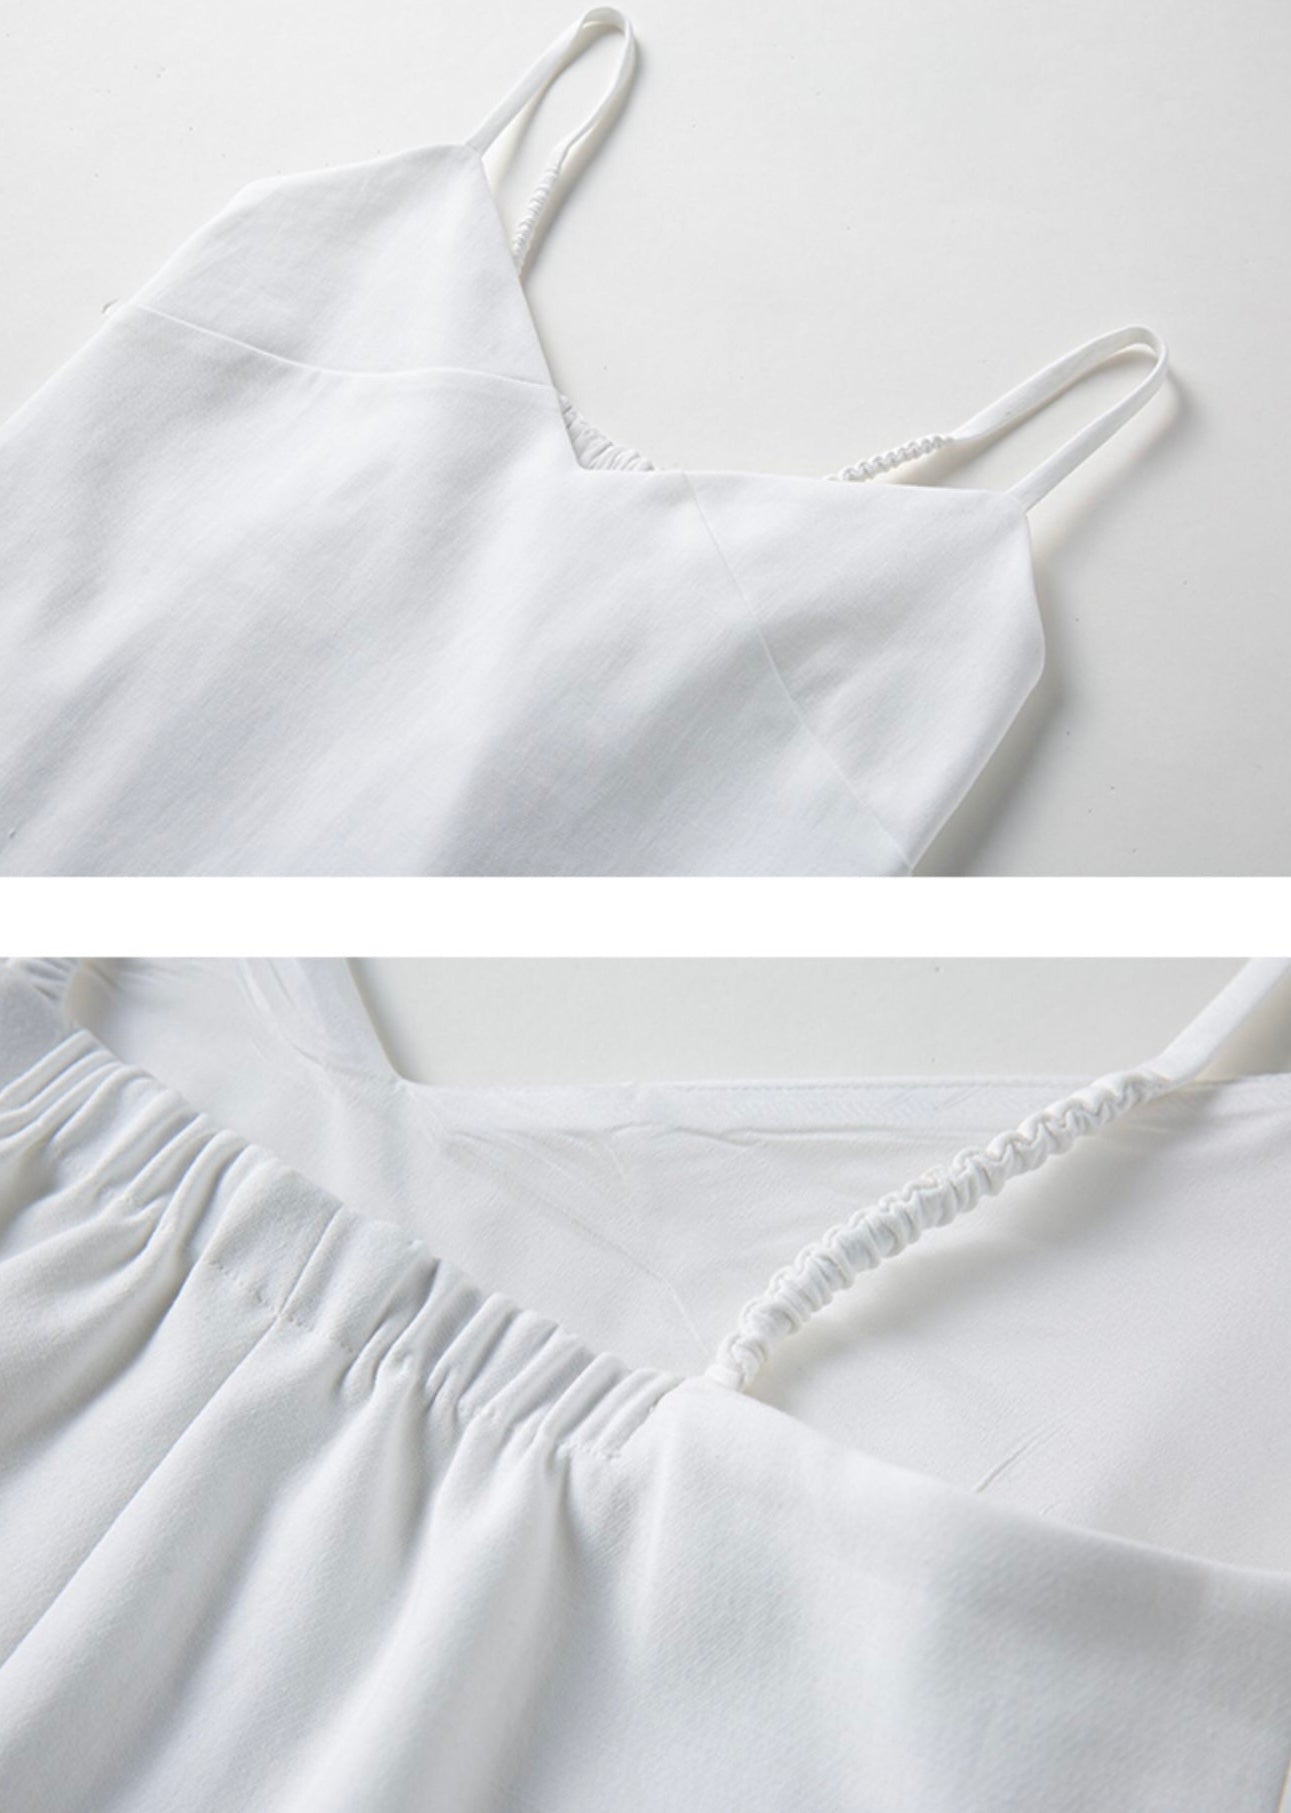 V Panel Camisole Top in White